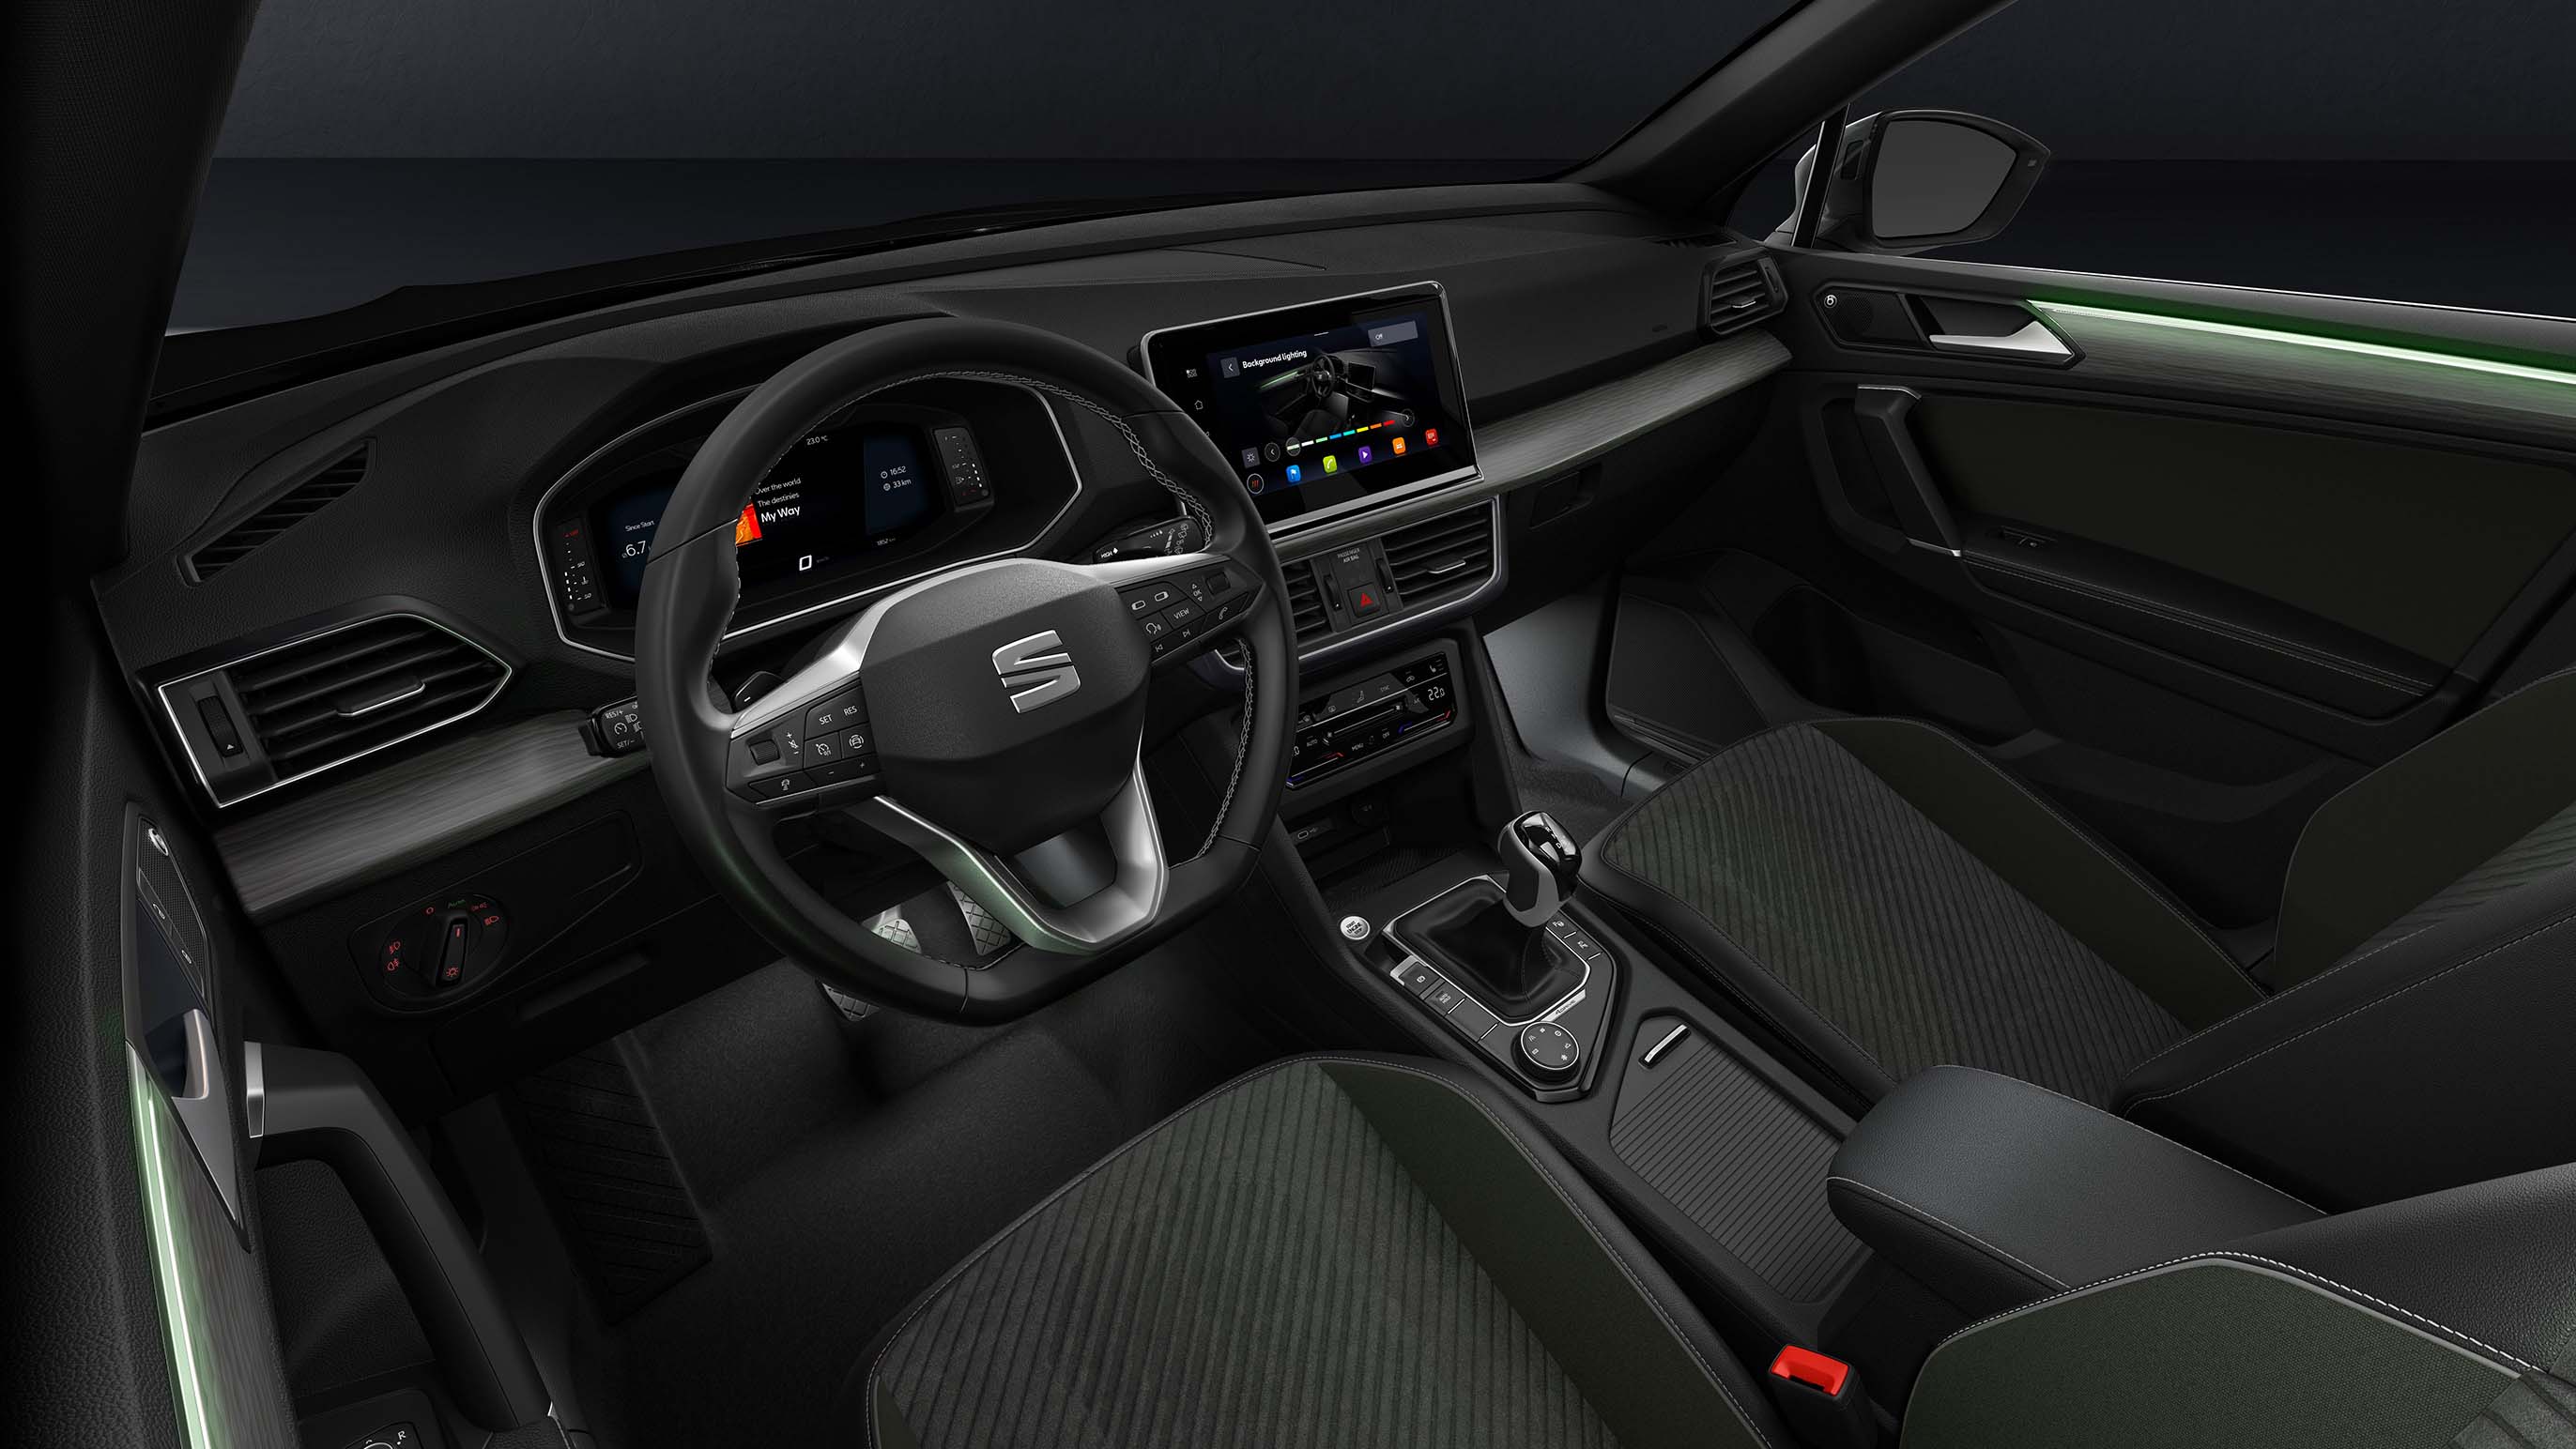 The new SEAT Tarraco XPERIENCE interior ambient light